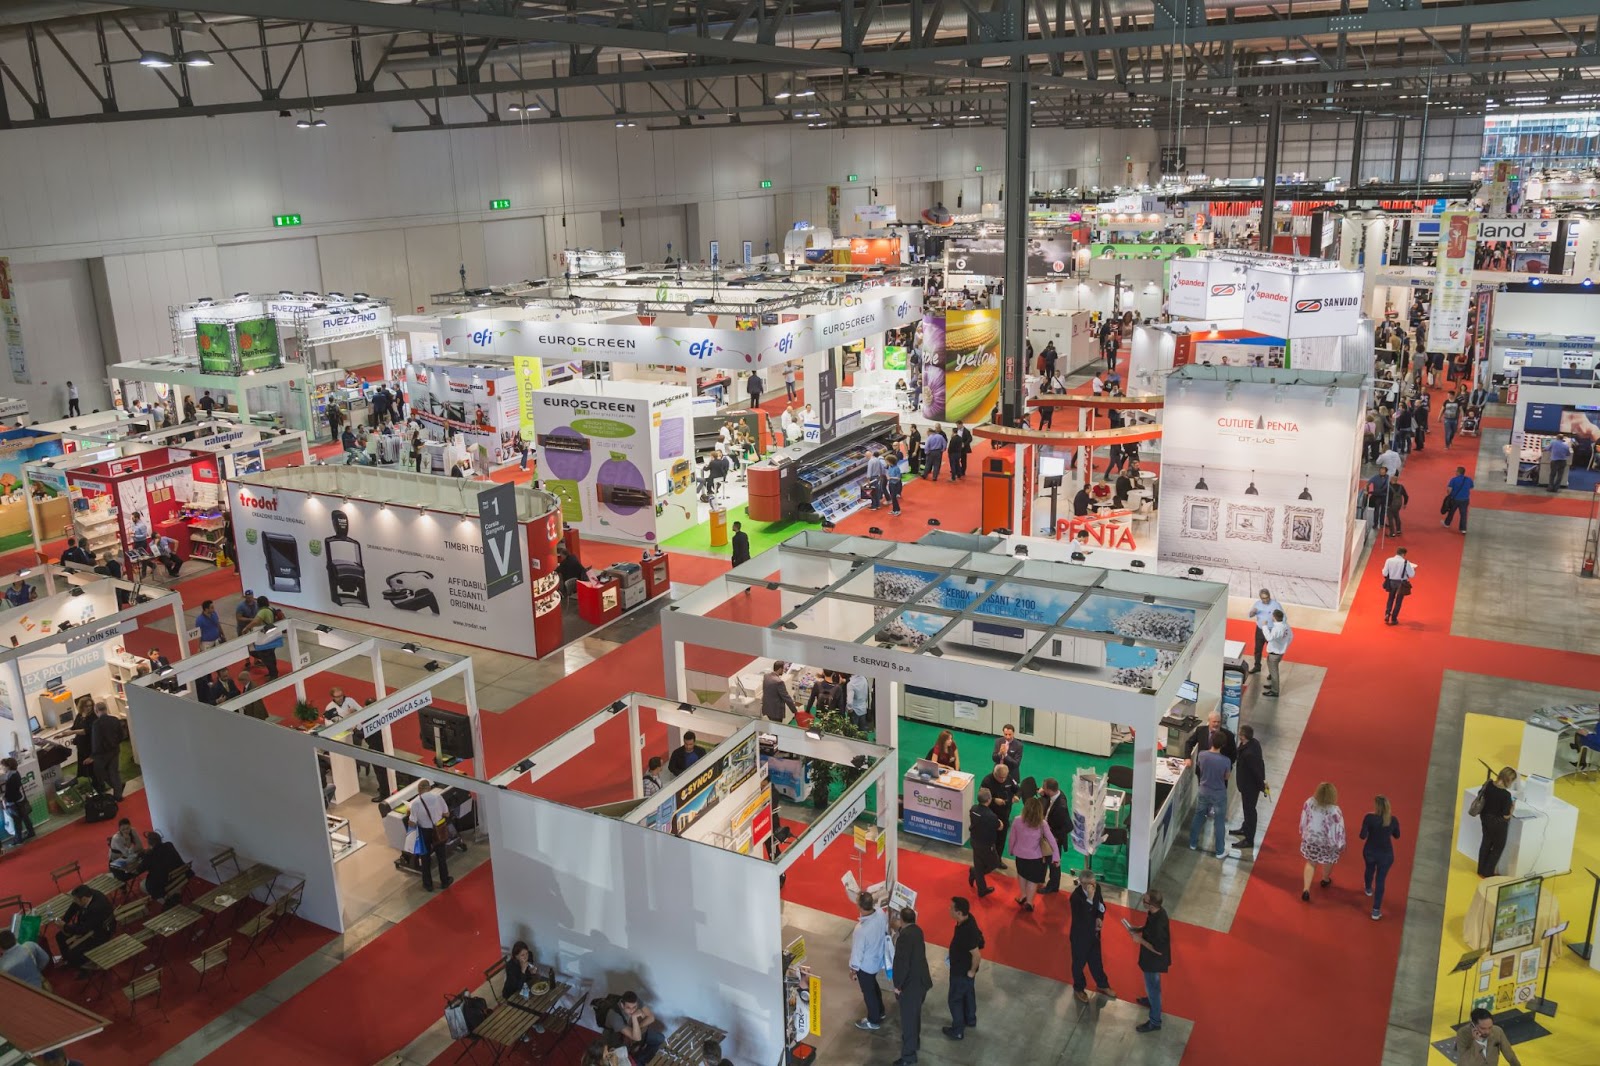 multiple trade show booths at an exhibit